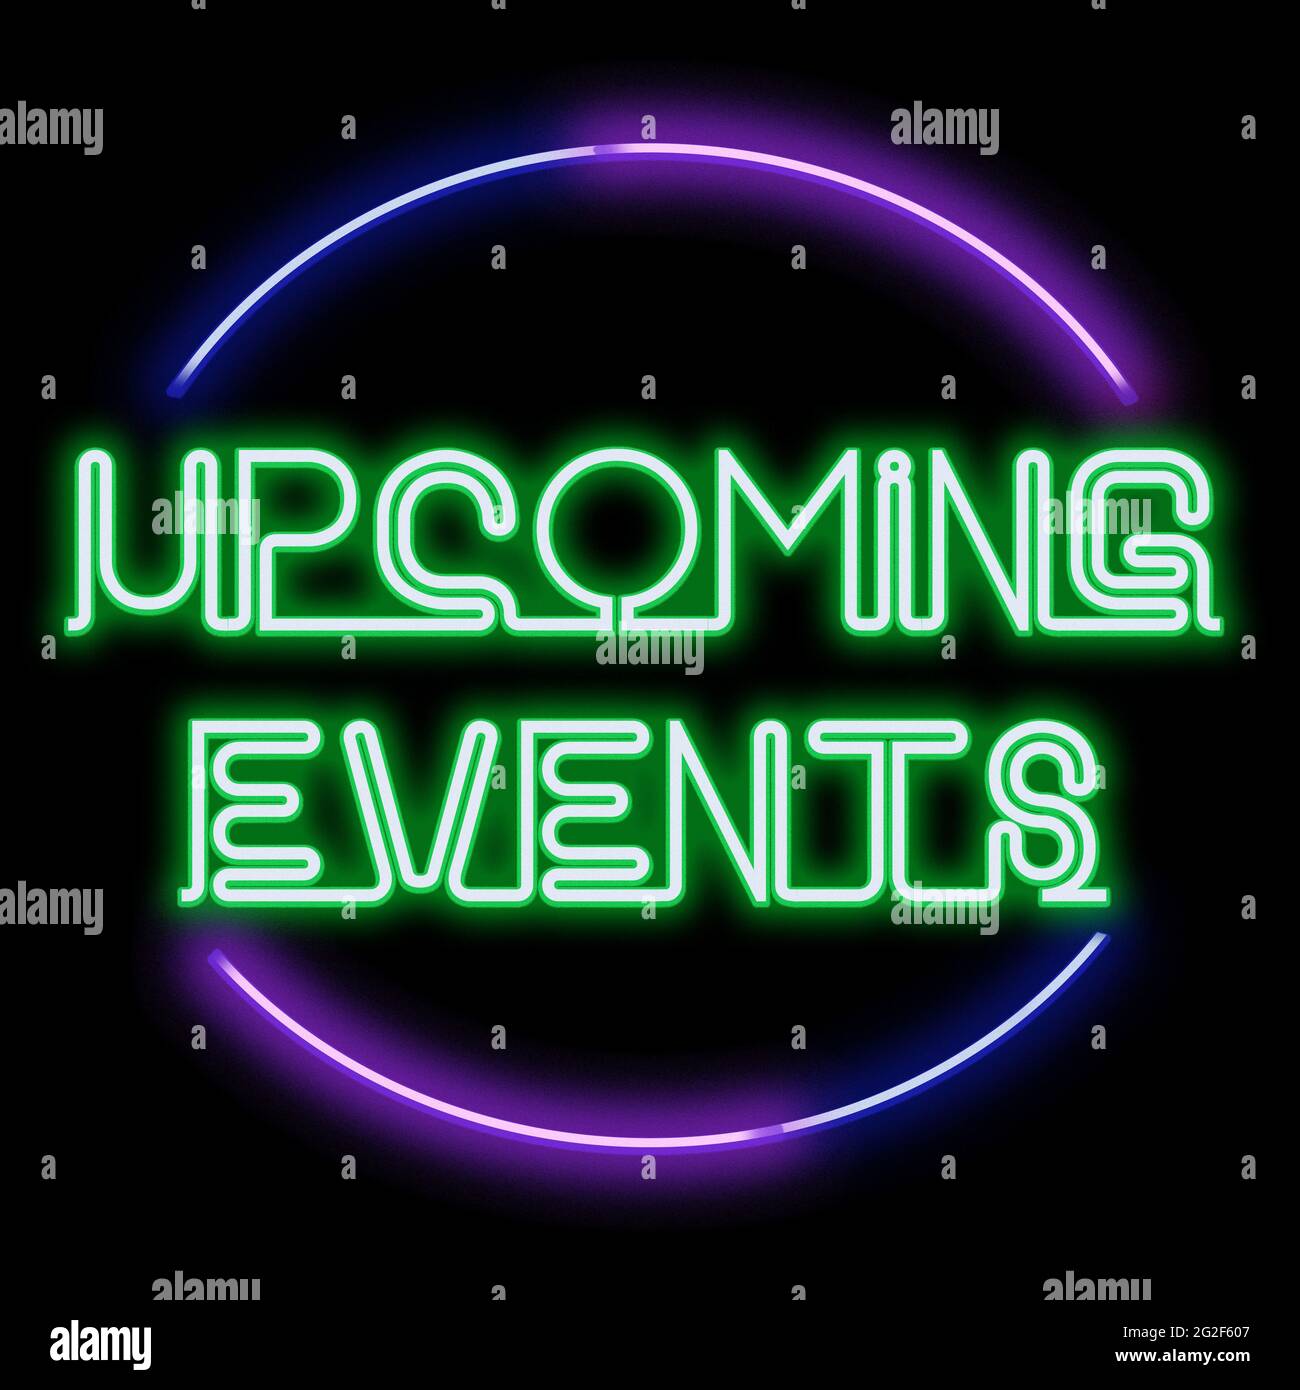 Upcoming Events Neon Illustration sign business Stock Photo